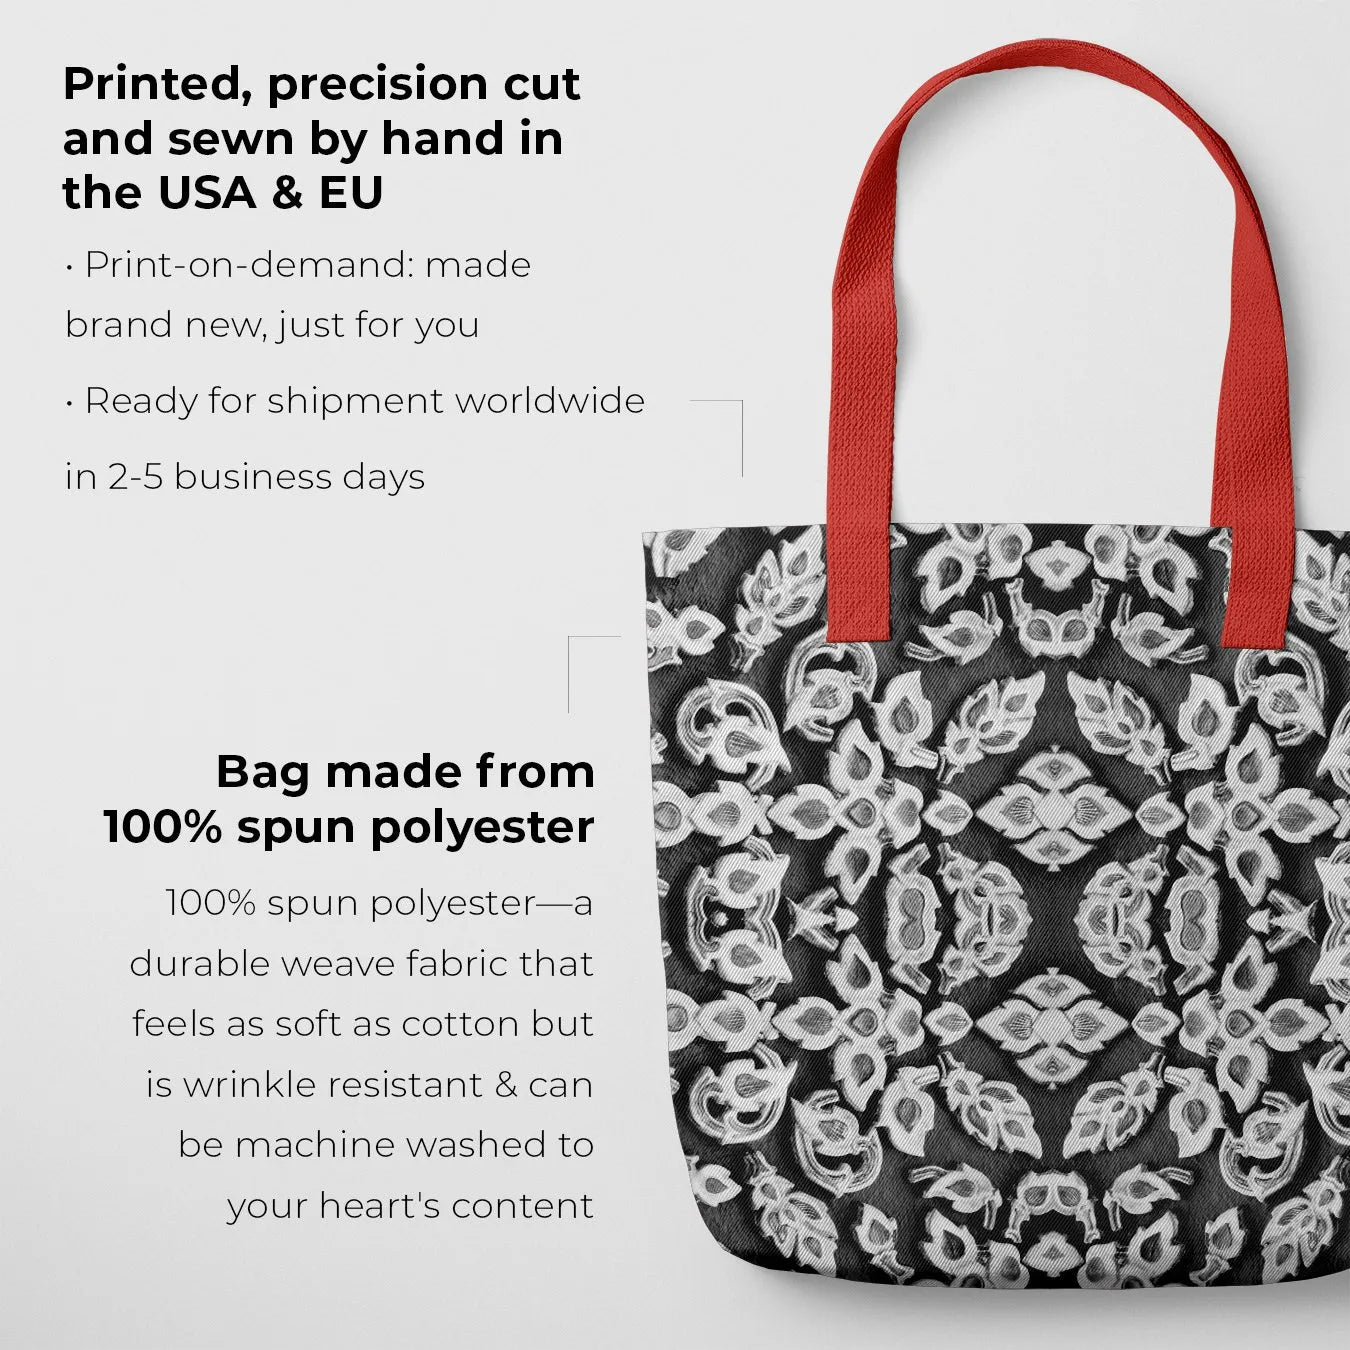 Ayodhya Tote - Black And White - Heavy Duty Reusable Grocery Bag - Shopping Totes - Aesthetic Art